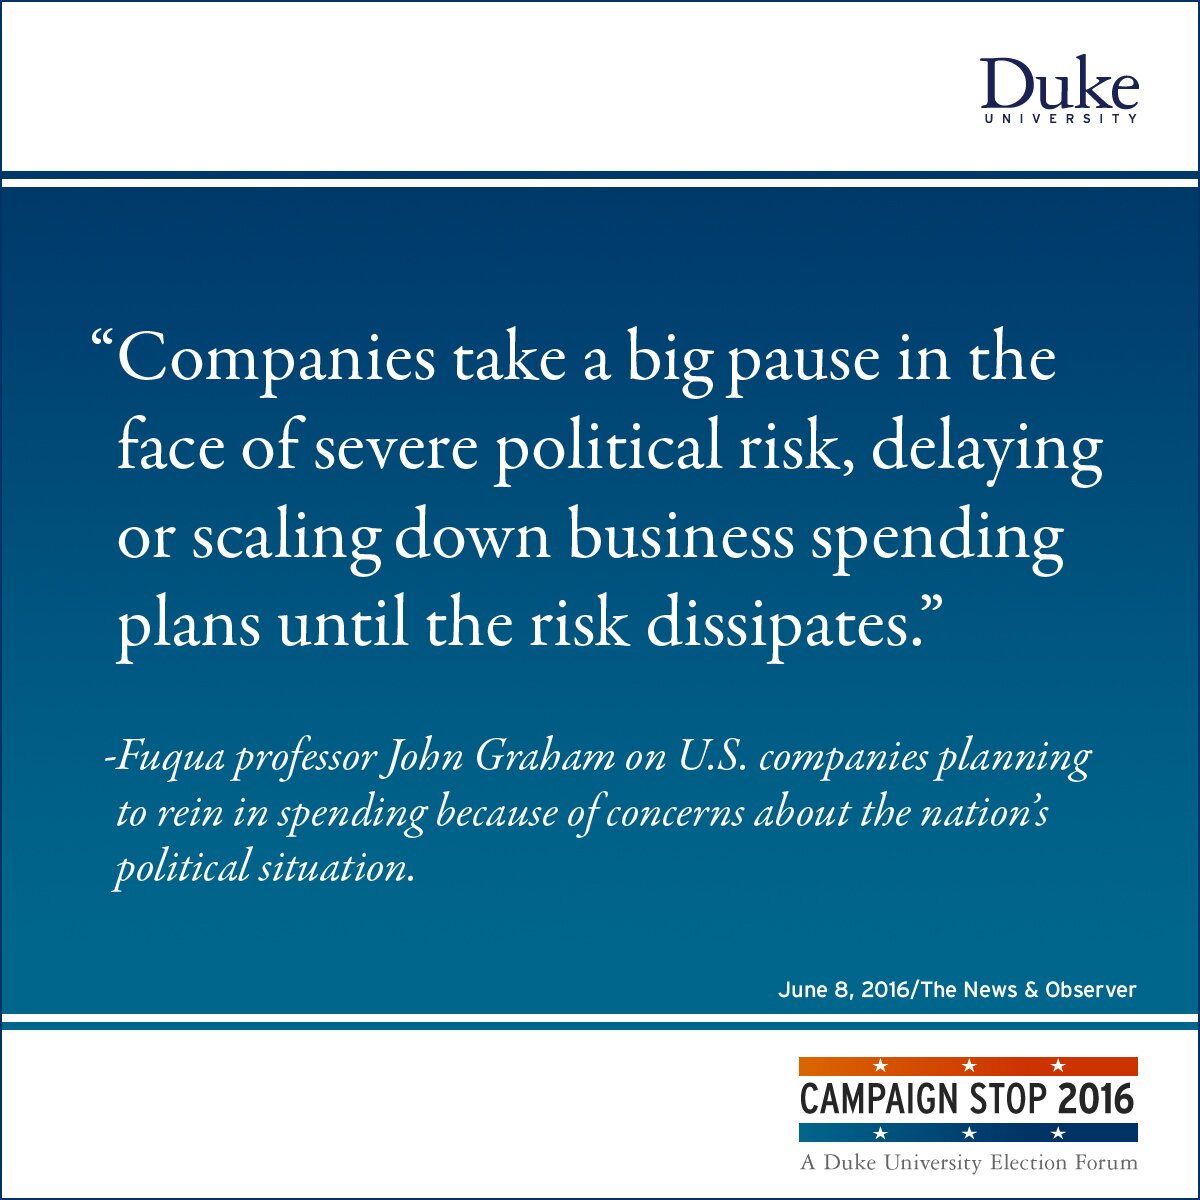 “Companies take a big pause in the face of severe political risk, delaying or scaling down business spending plans until the risk dissipates.” -Fuqua professor John Graham on U.S. companies planning to rein in spending because of concerns about the nation’s political situation.